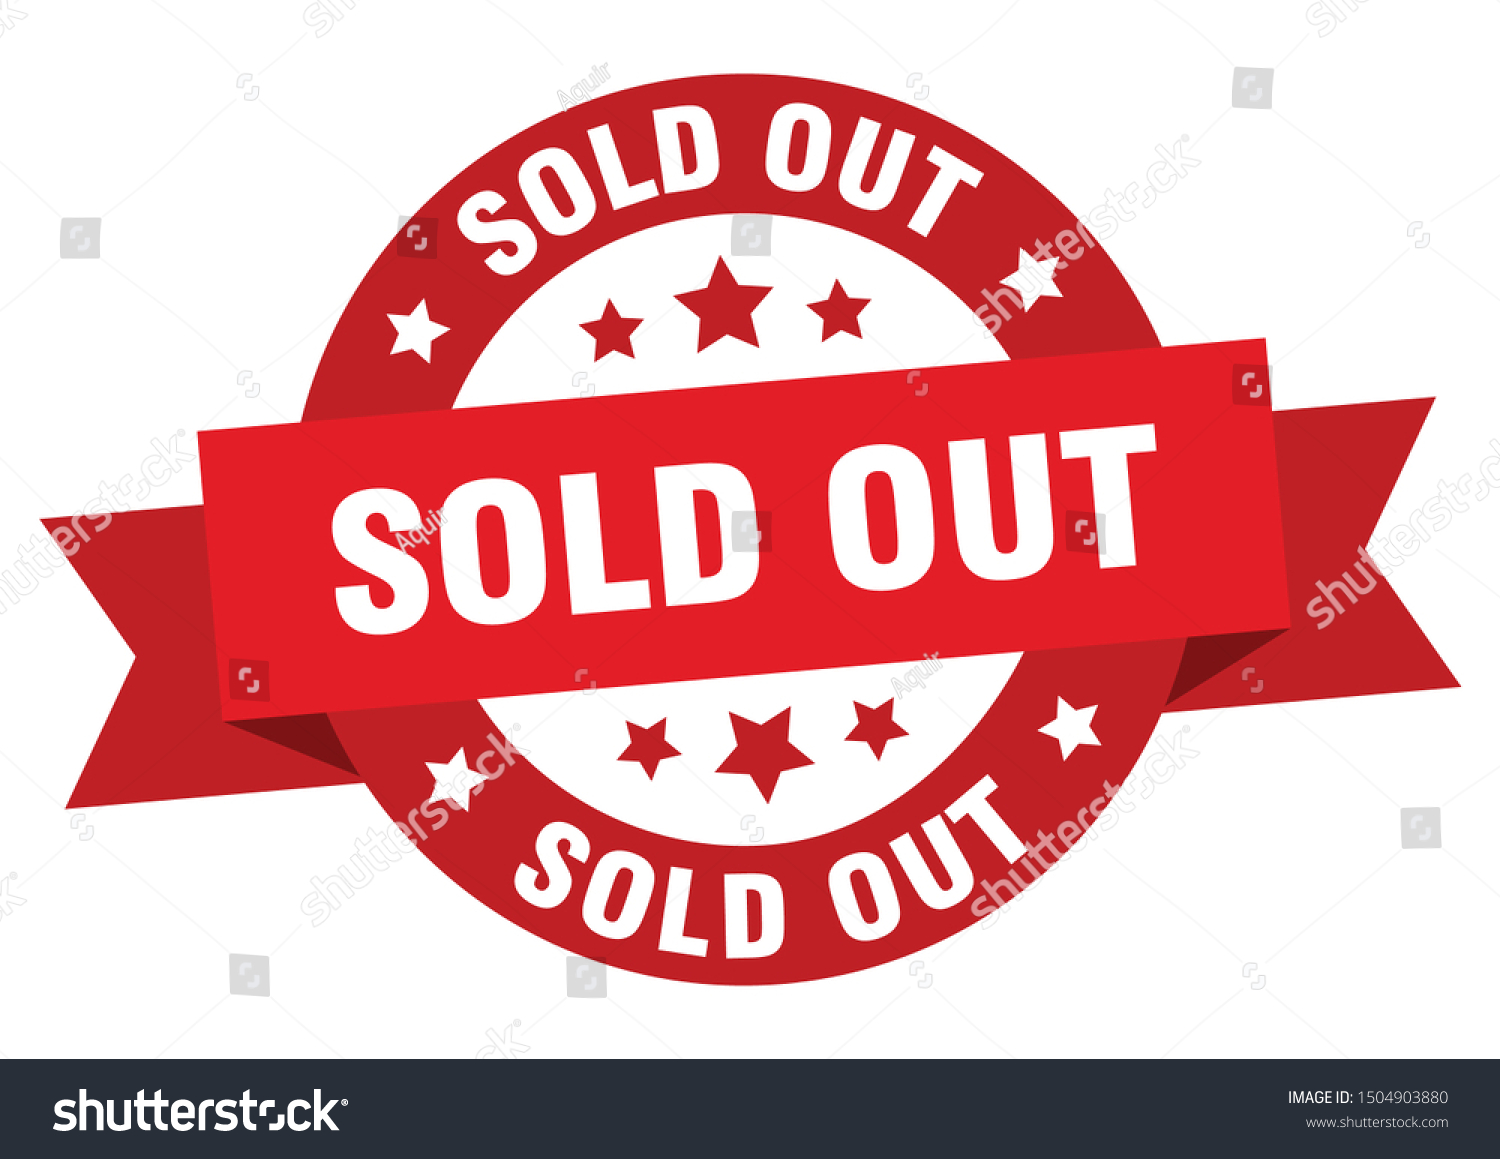 Vektor Stok Sold Out Ribbon Sold Out Round (Tanpa Royalti) 1504903880 |  Shutterstock